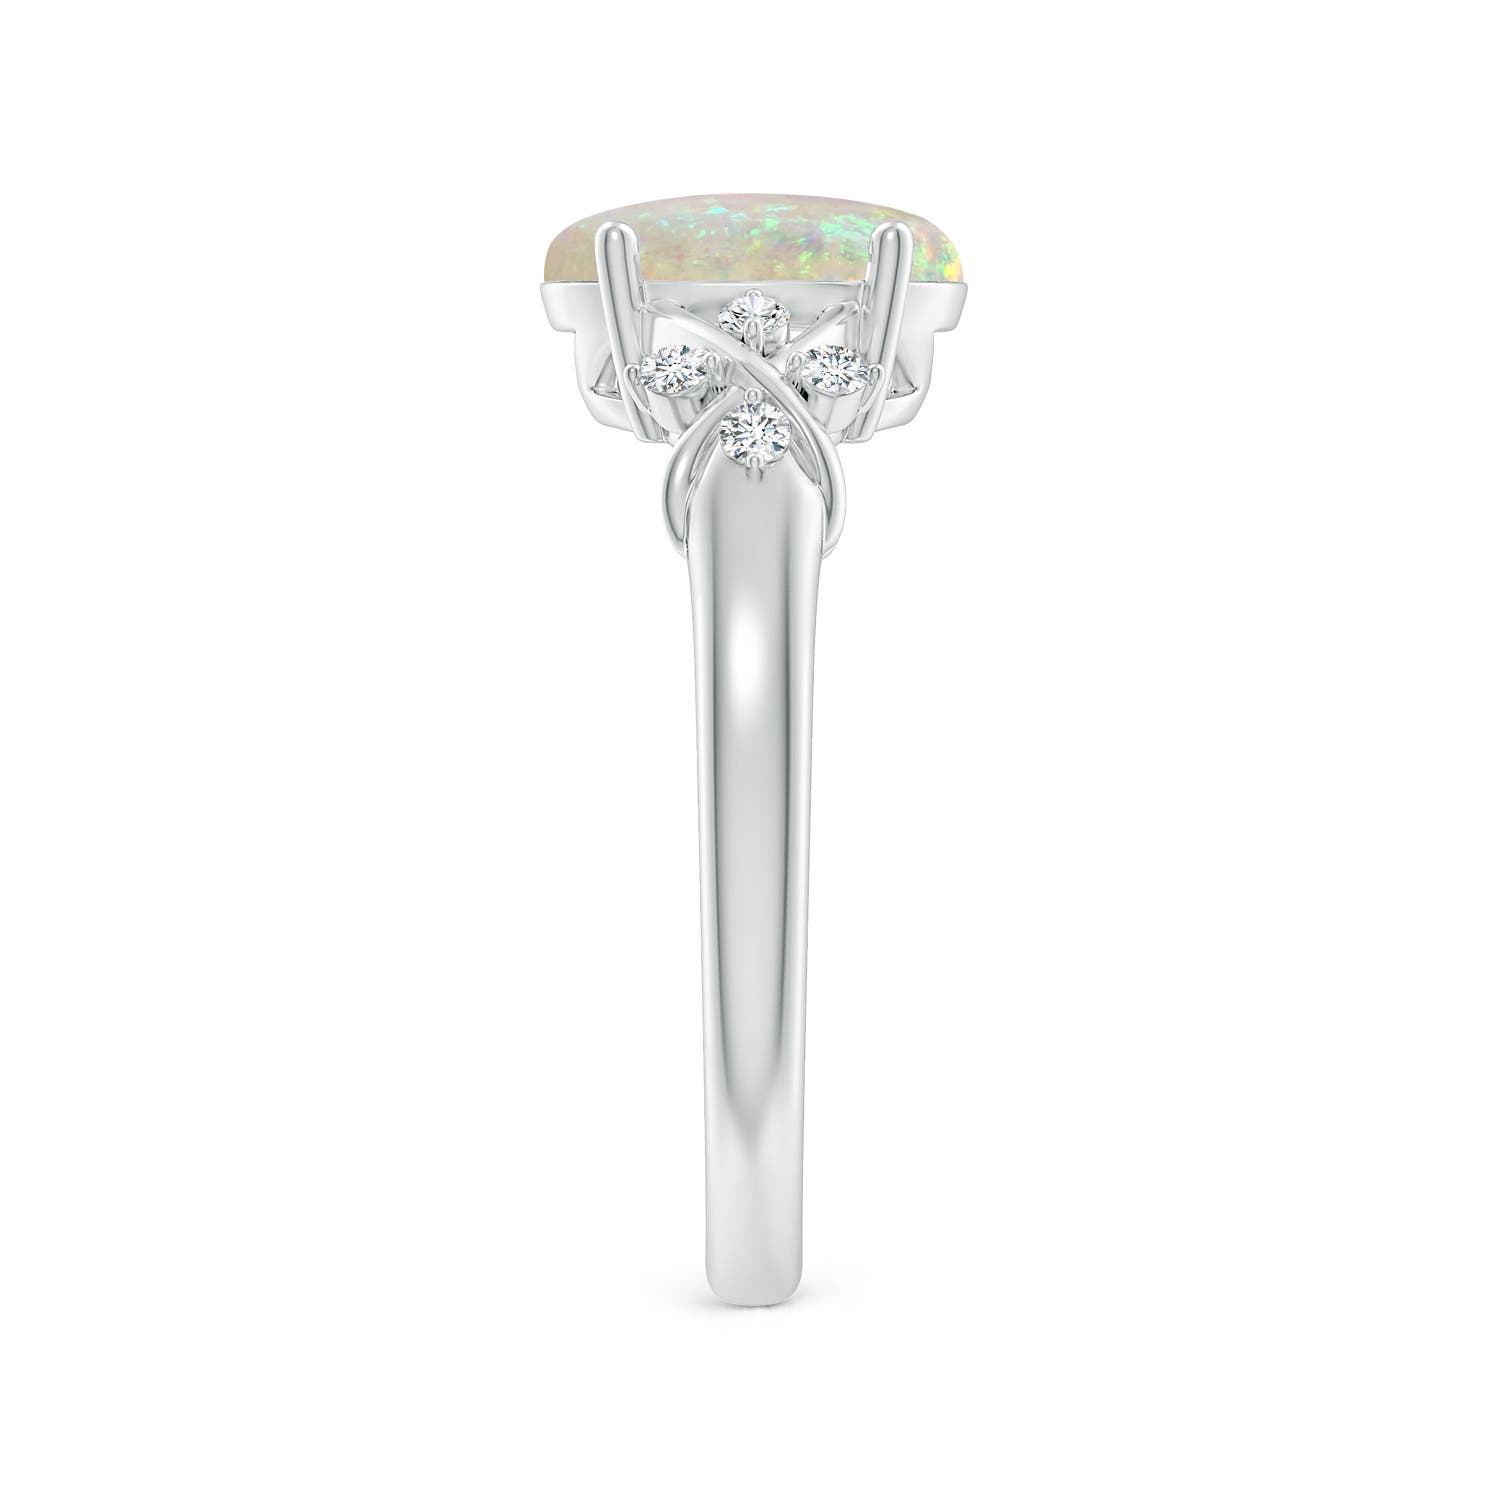 AAA - Opal / 1.21 CT / 14 KT White Gold